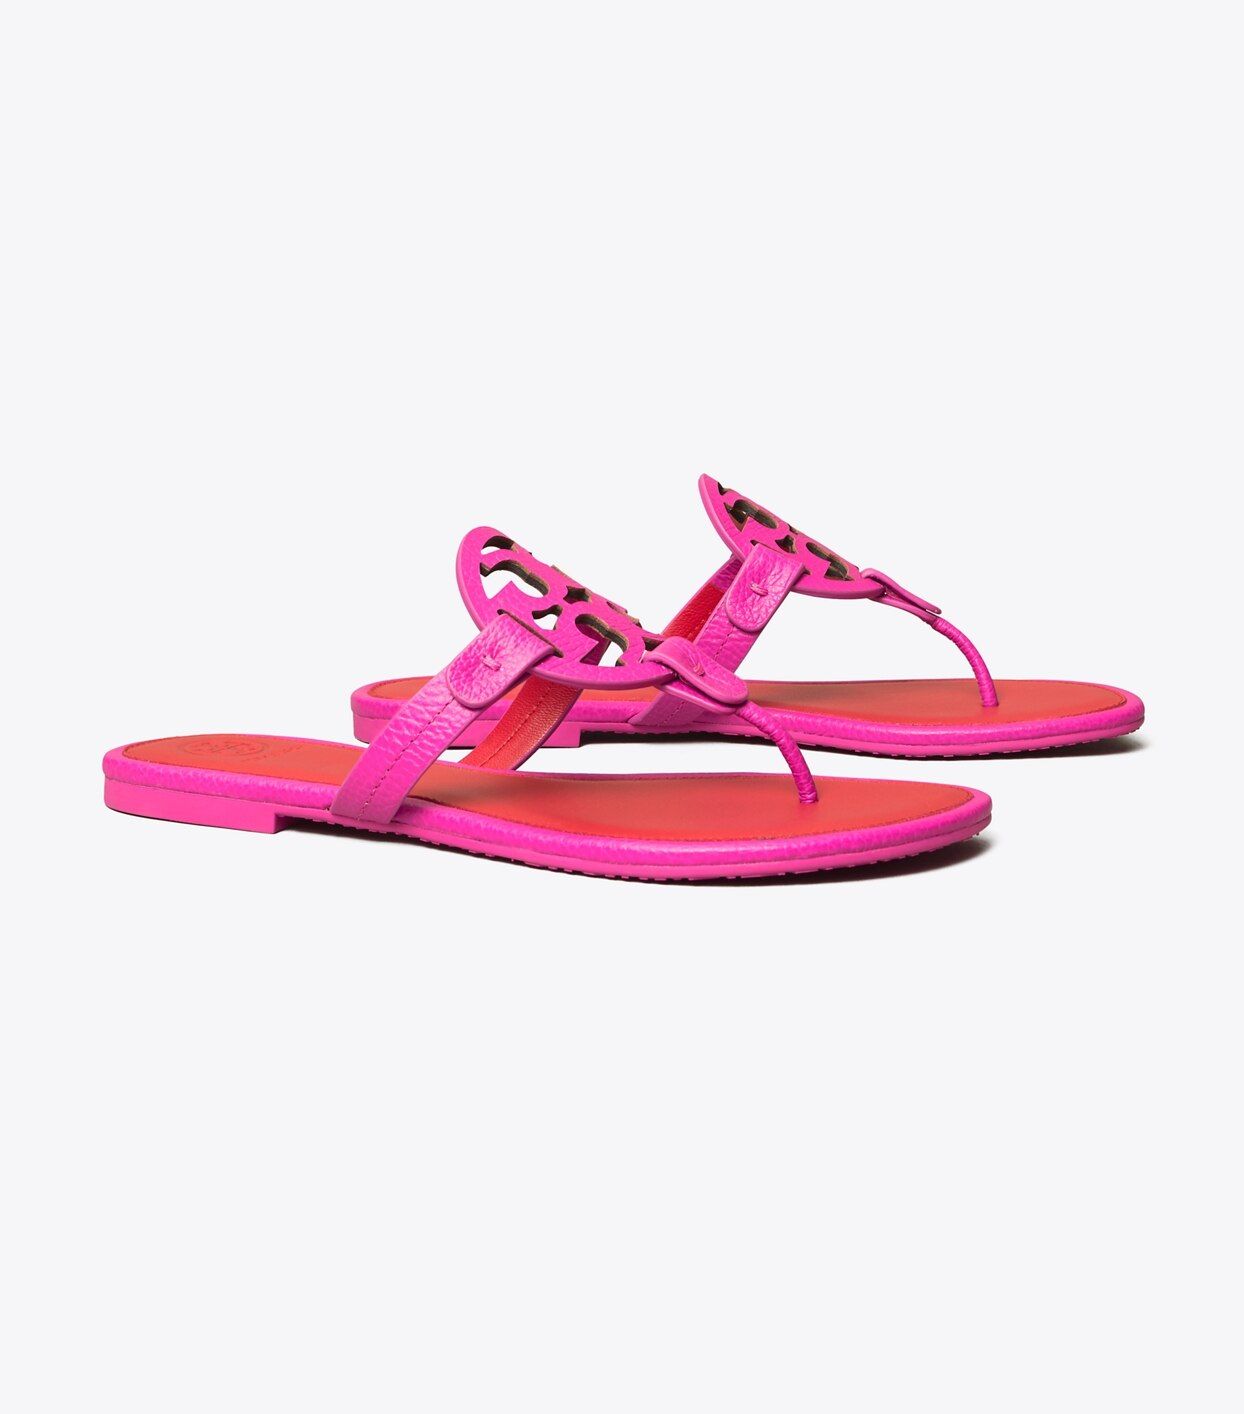 Miller Sandal, Tumbled Leather$22814colorimperial pink / brilliant redSelect Size55.566.577.588.5... | Tory Burch (US)